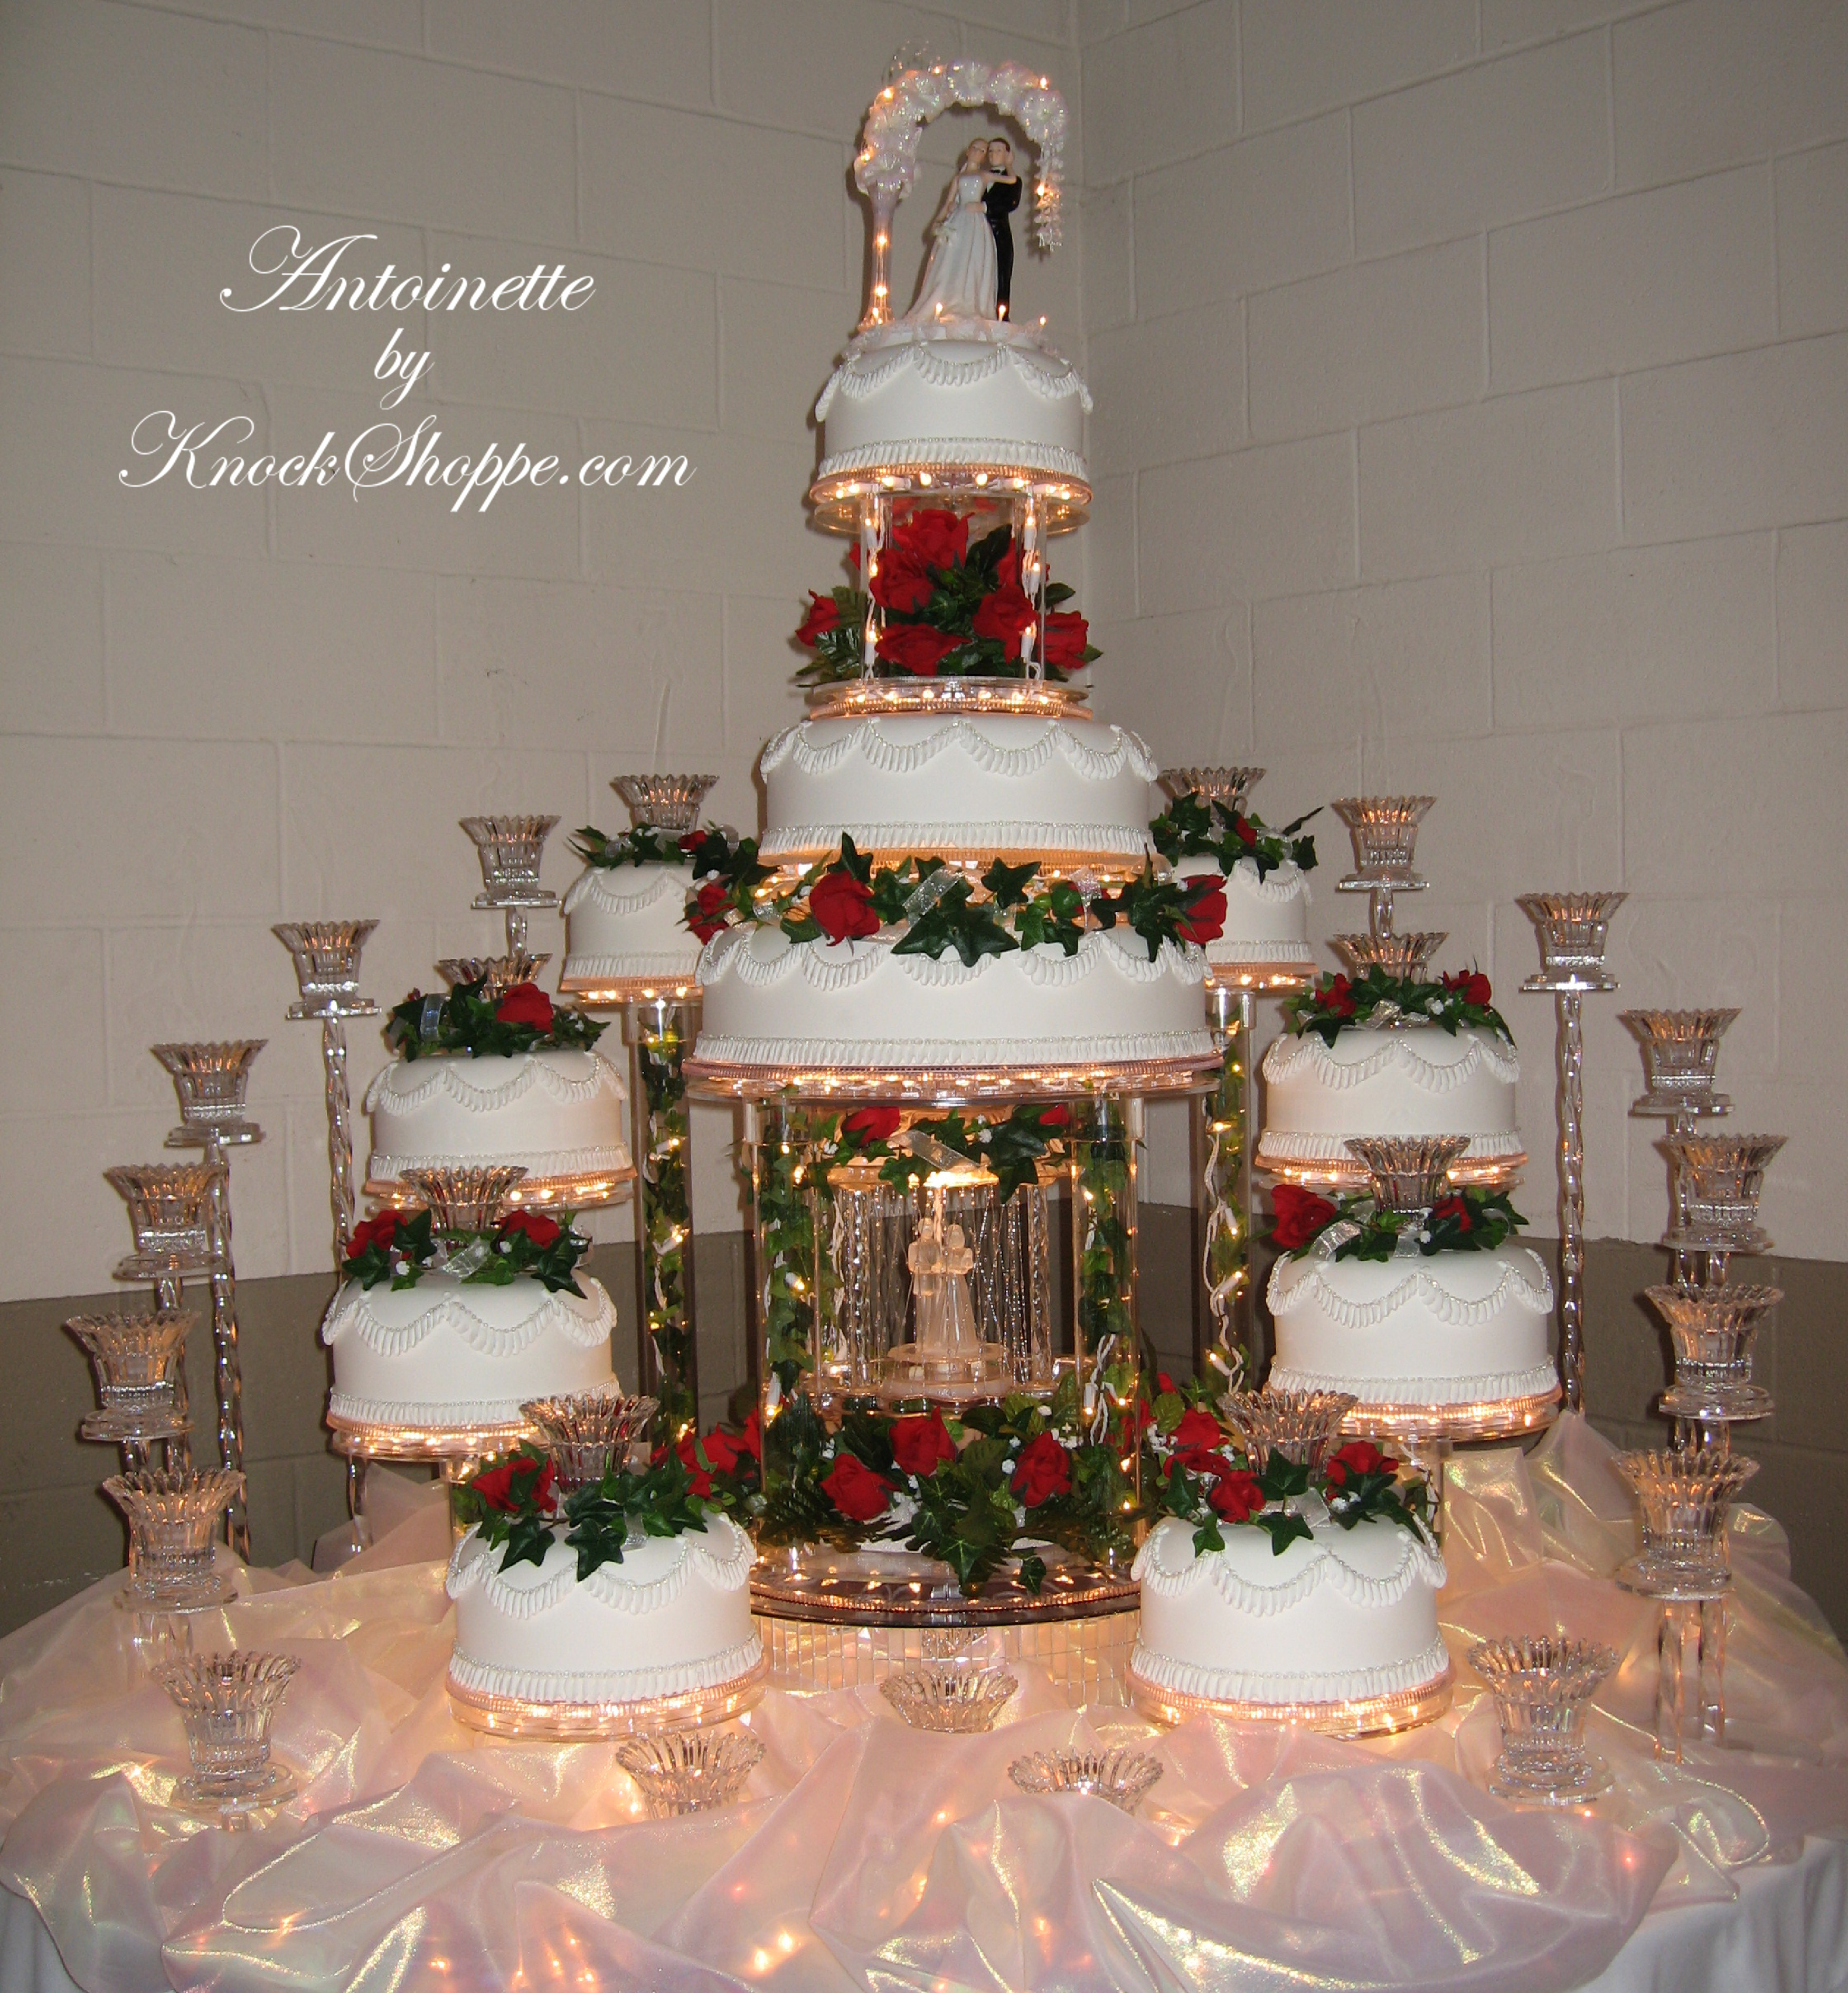 Cake Stands For Wedding Cakes
 Antoinette Lighted Cake Stand The Knock Shoppe